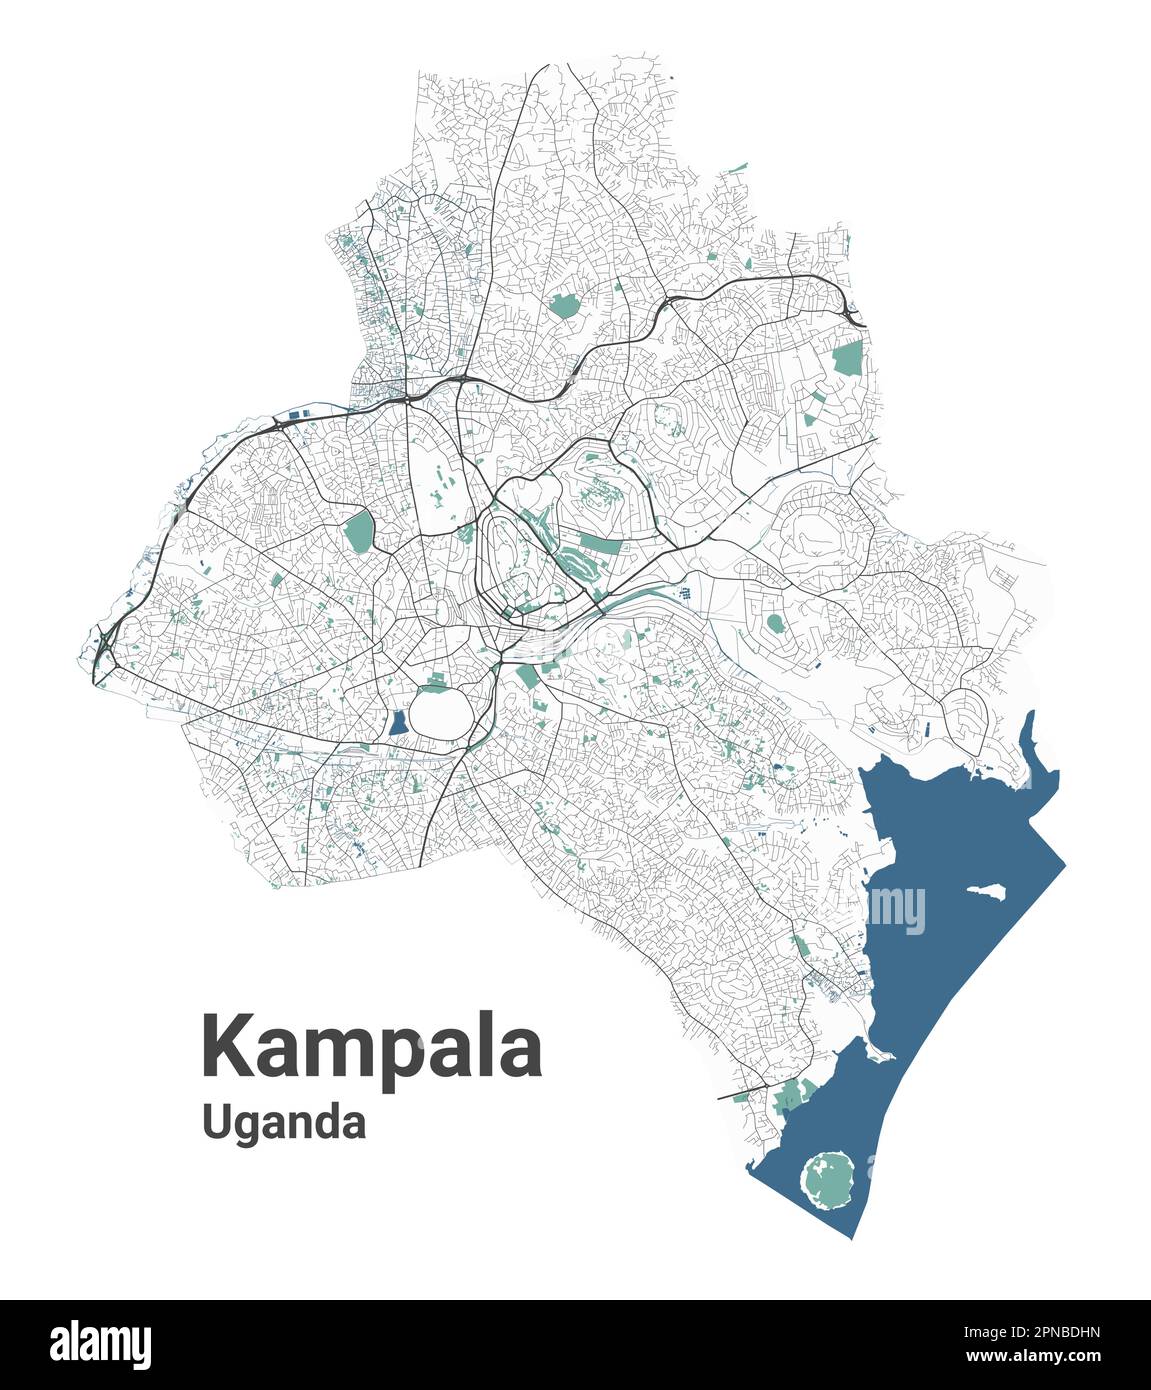 Kampala map, capital city of Uganda. Municipal administrative area map with rivers and roads, parks and railways. Vector illustration. Stock Vector